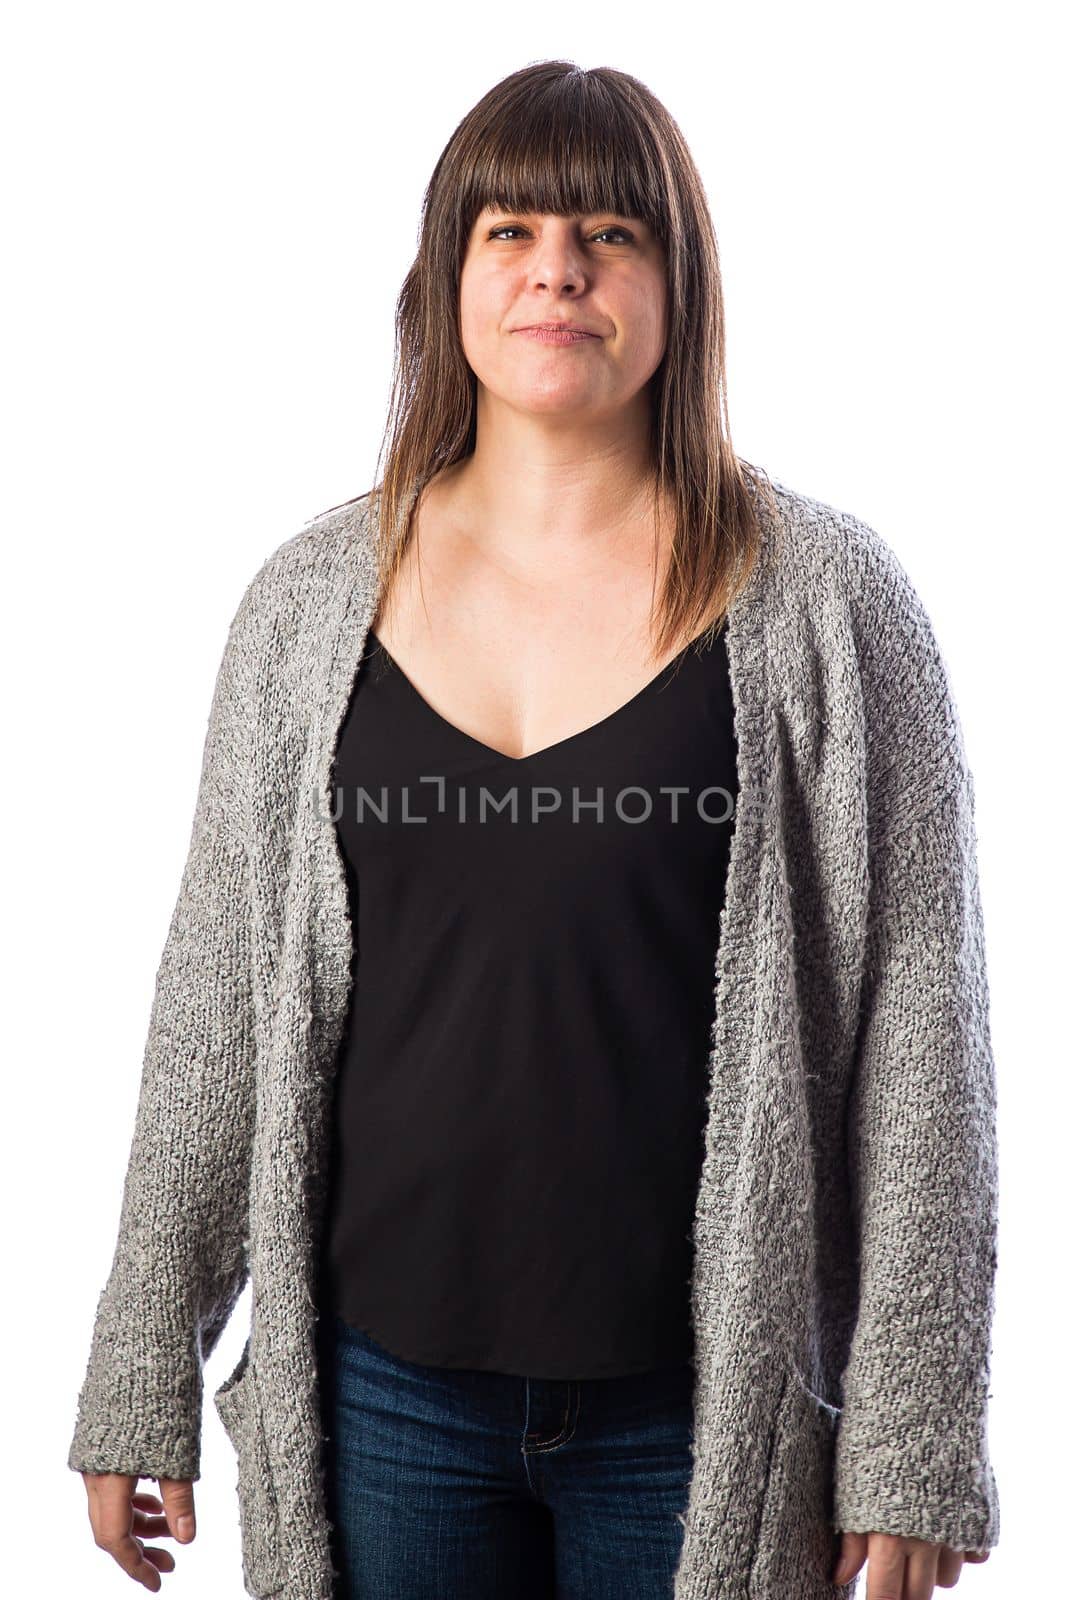 Isolated portrait of a forty year old woman, wearing a gray vest